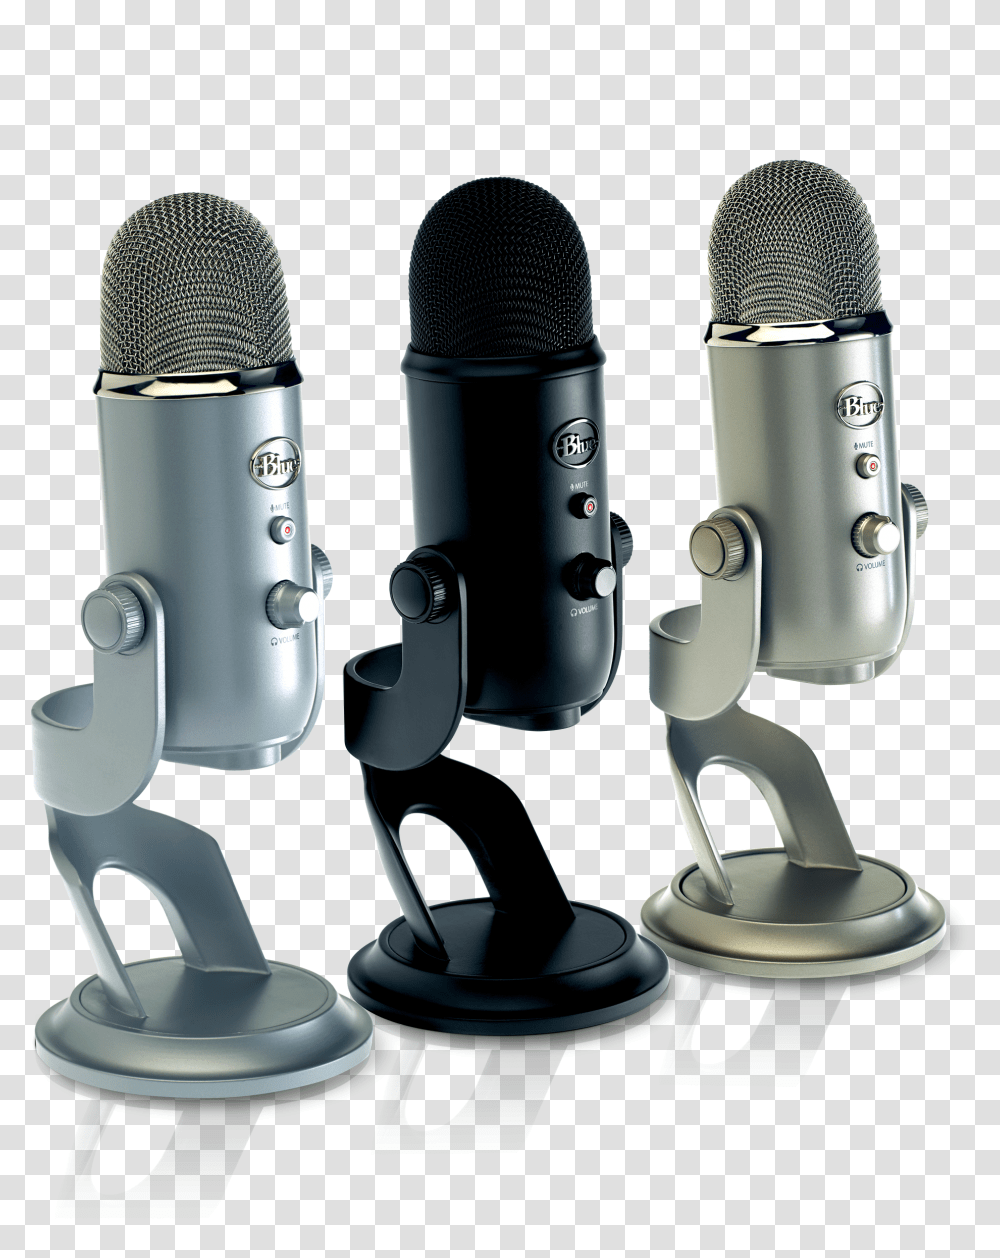 Best Podcast Mic, Electrical Device, Microphone, Mixer, Appliance Transparent Png